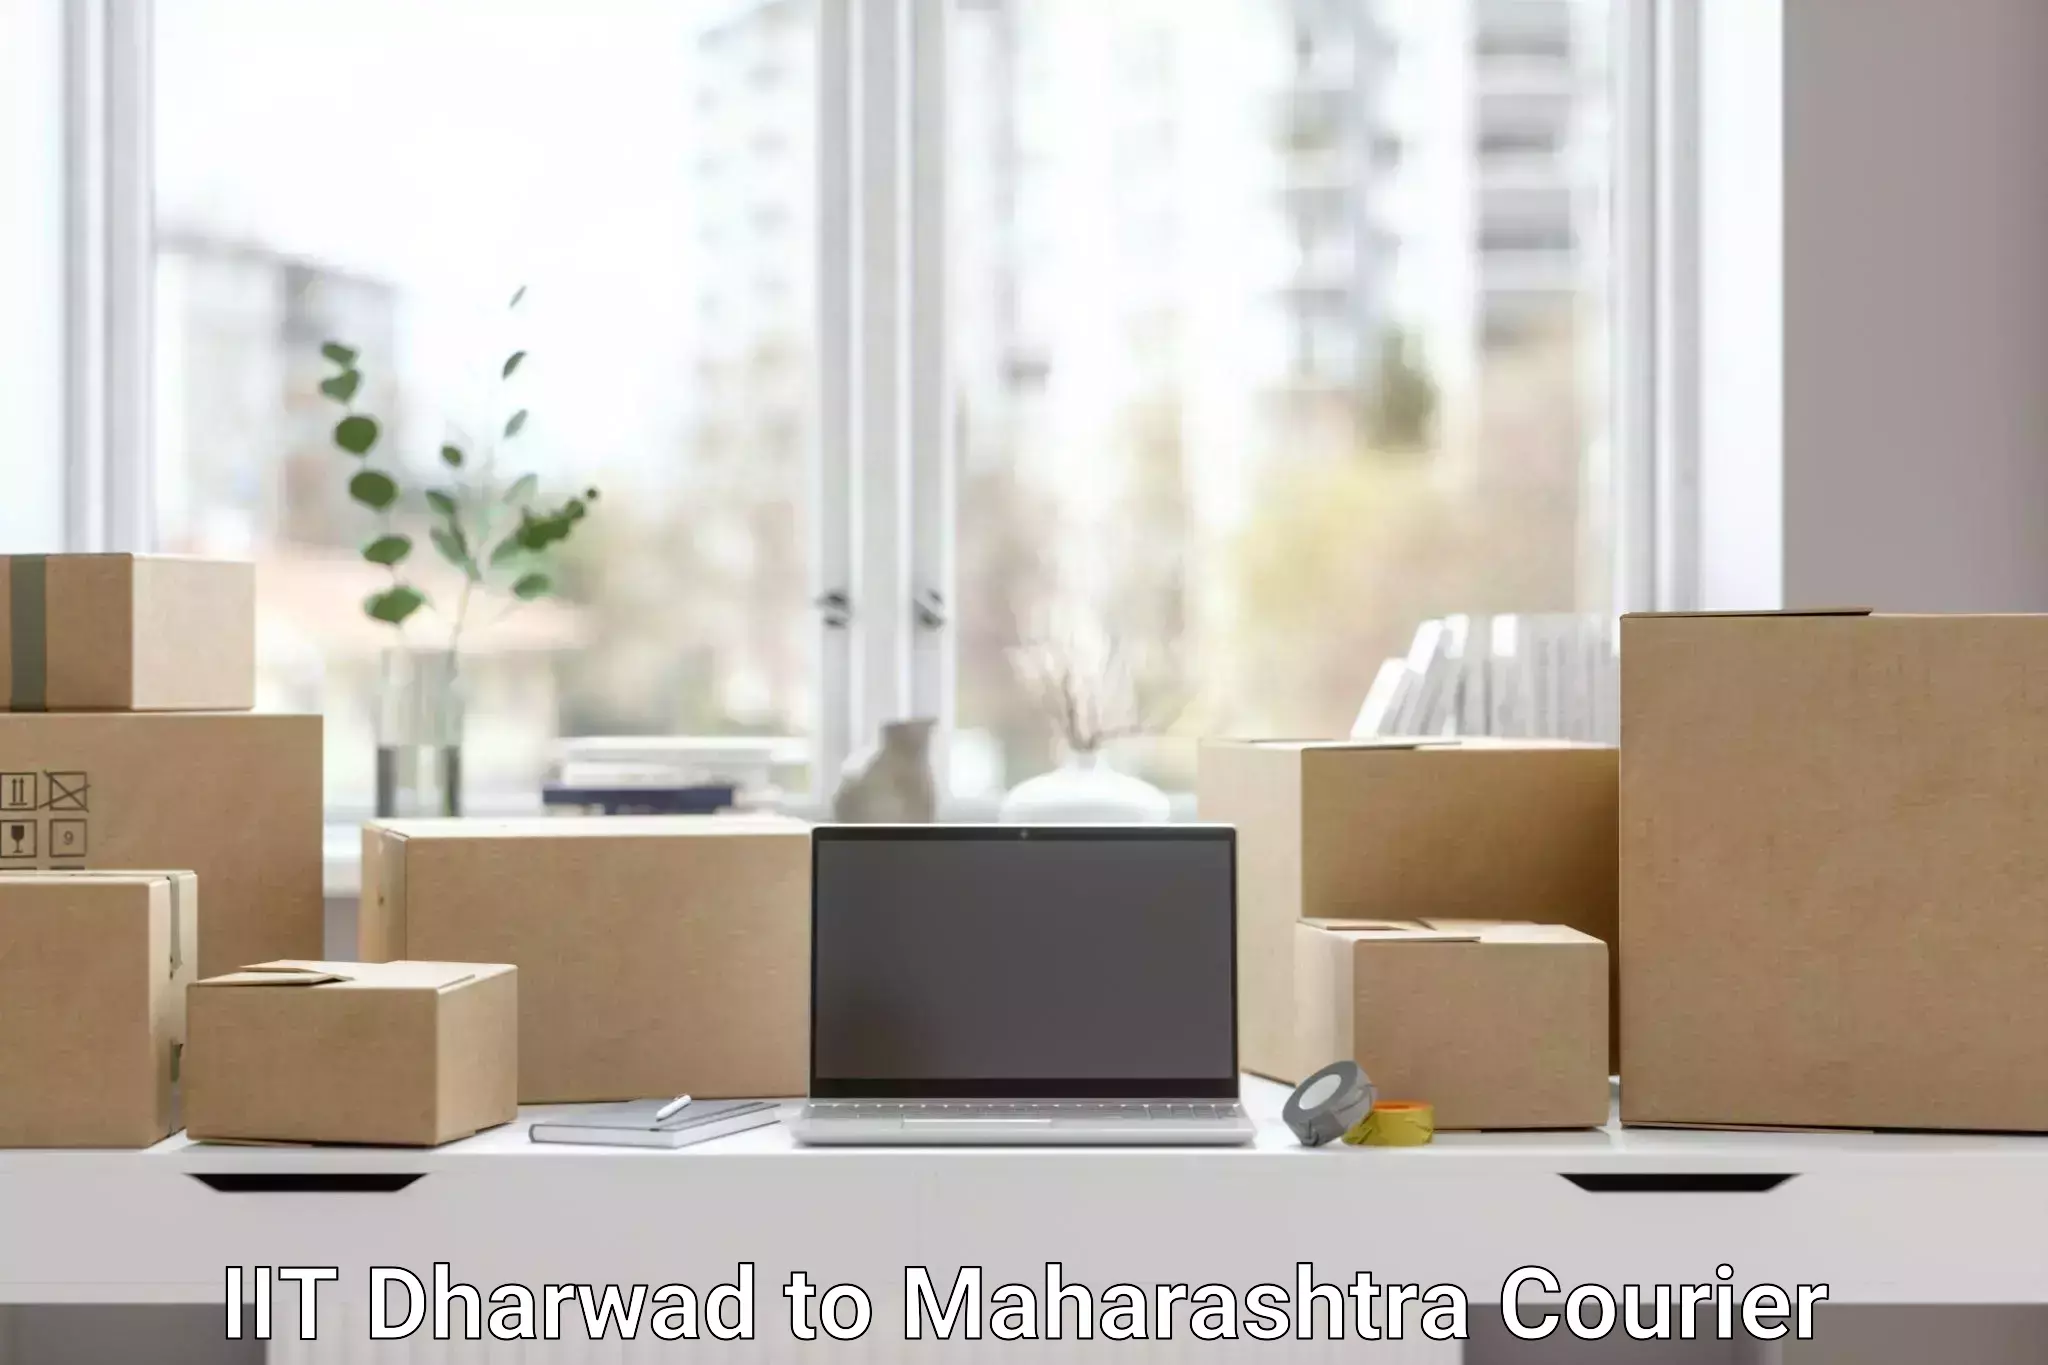 Small business couriers IIT Dharwad to Maharashtra